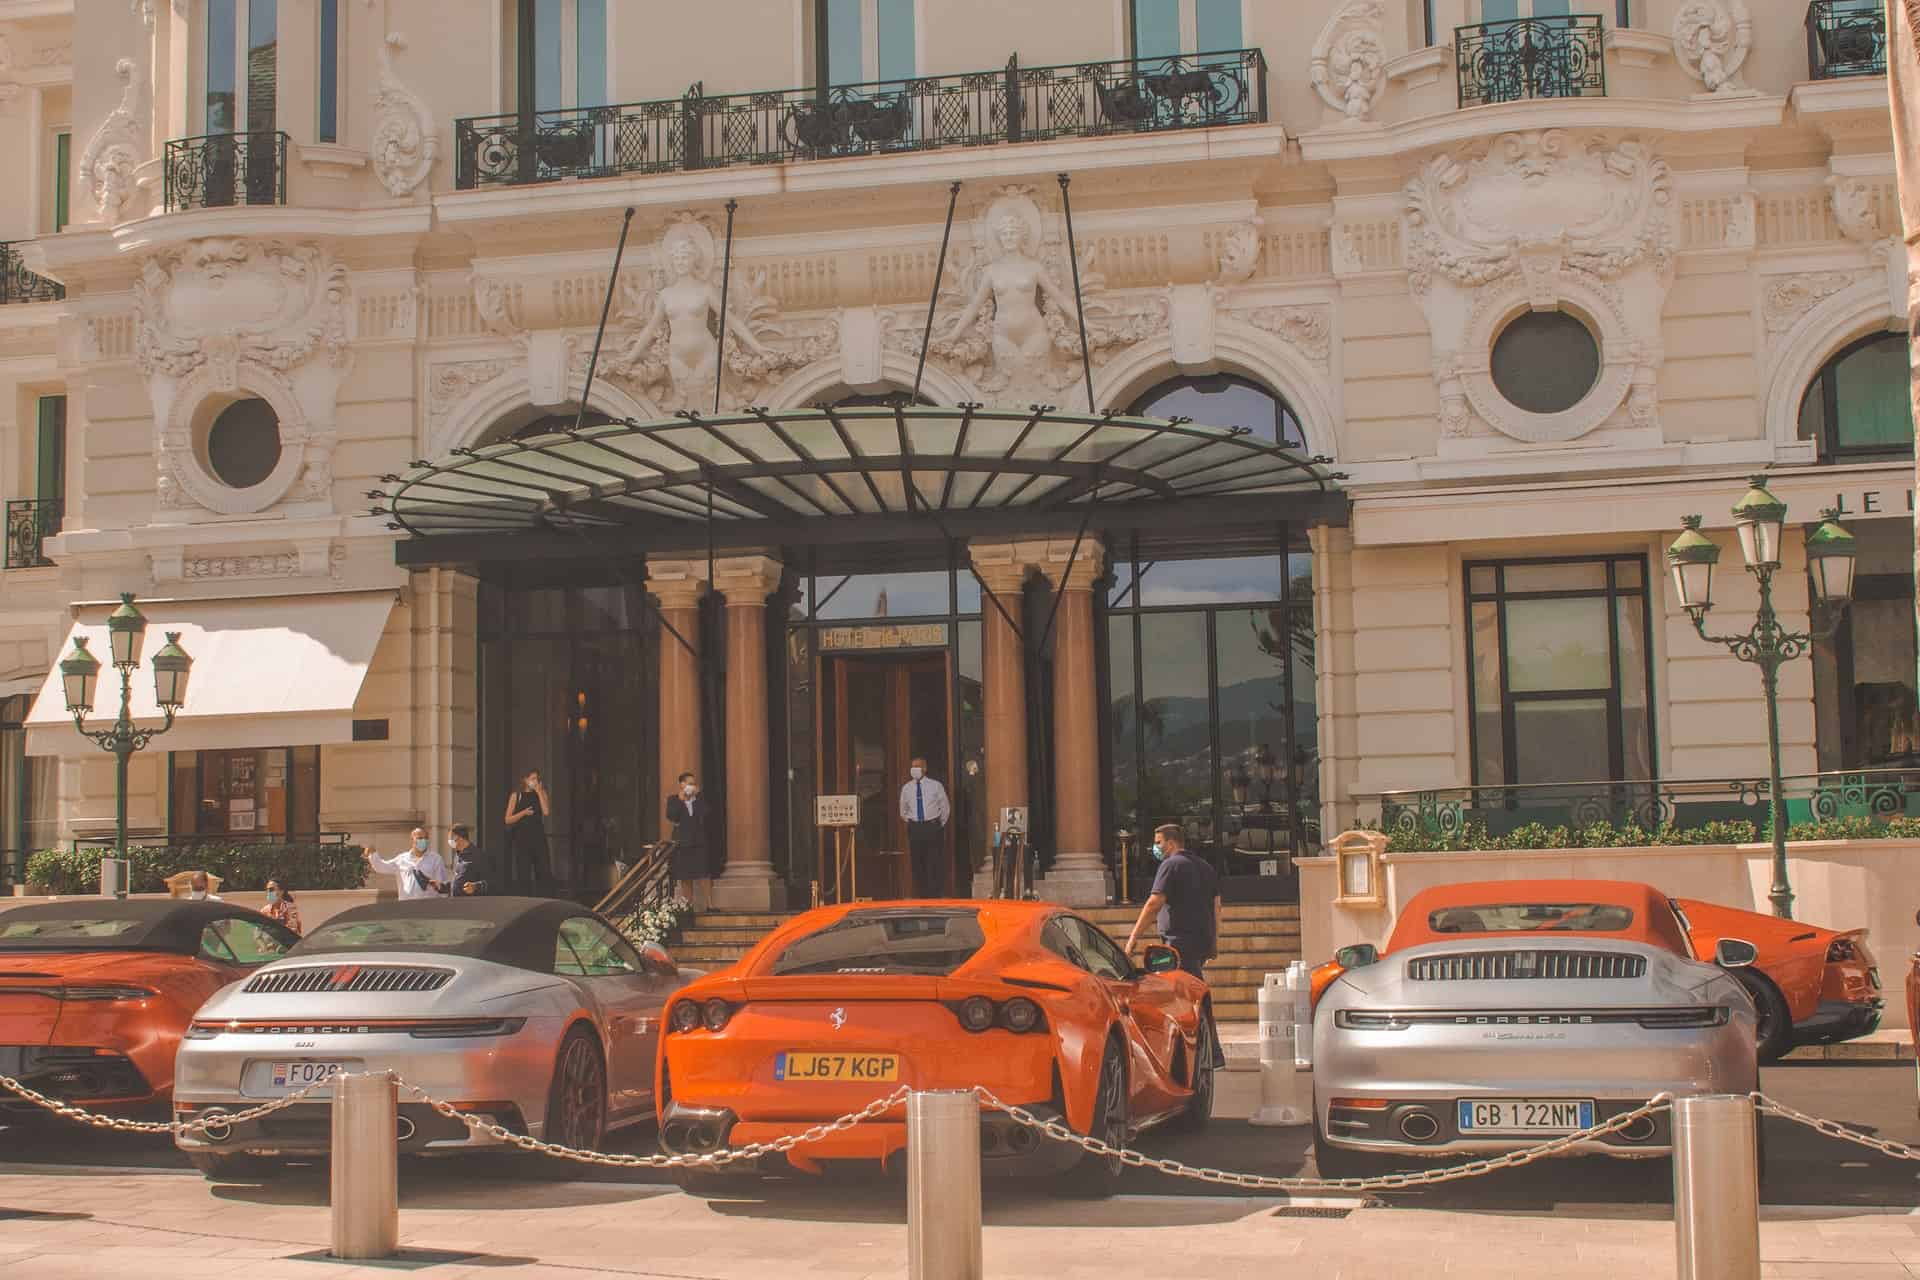 Best things to do in Monaco - AJ Saunders - Hôtel de Paris Monte-Carlo and exotic cars by Diane Picchiottino on Unsplash